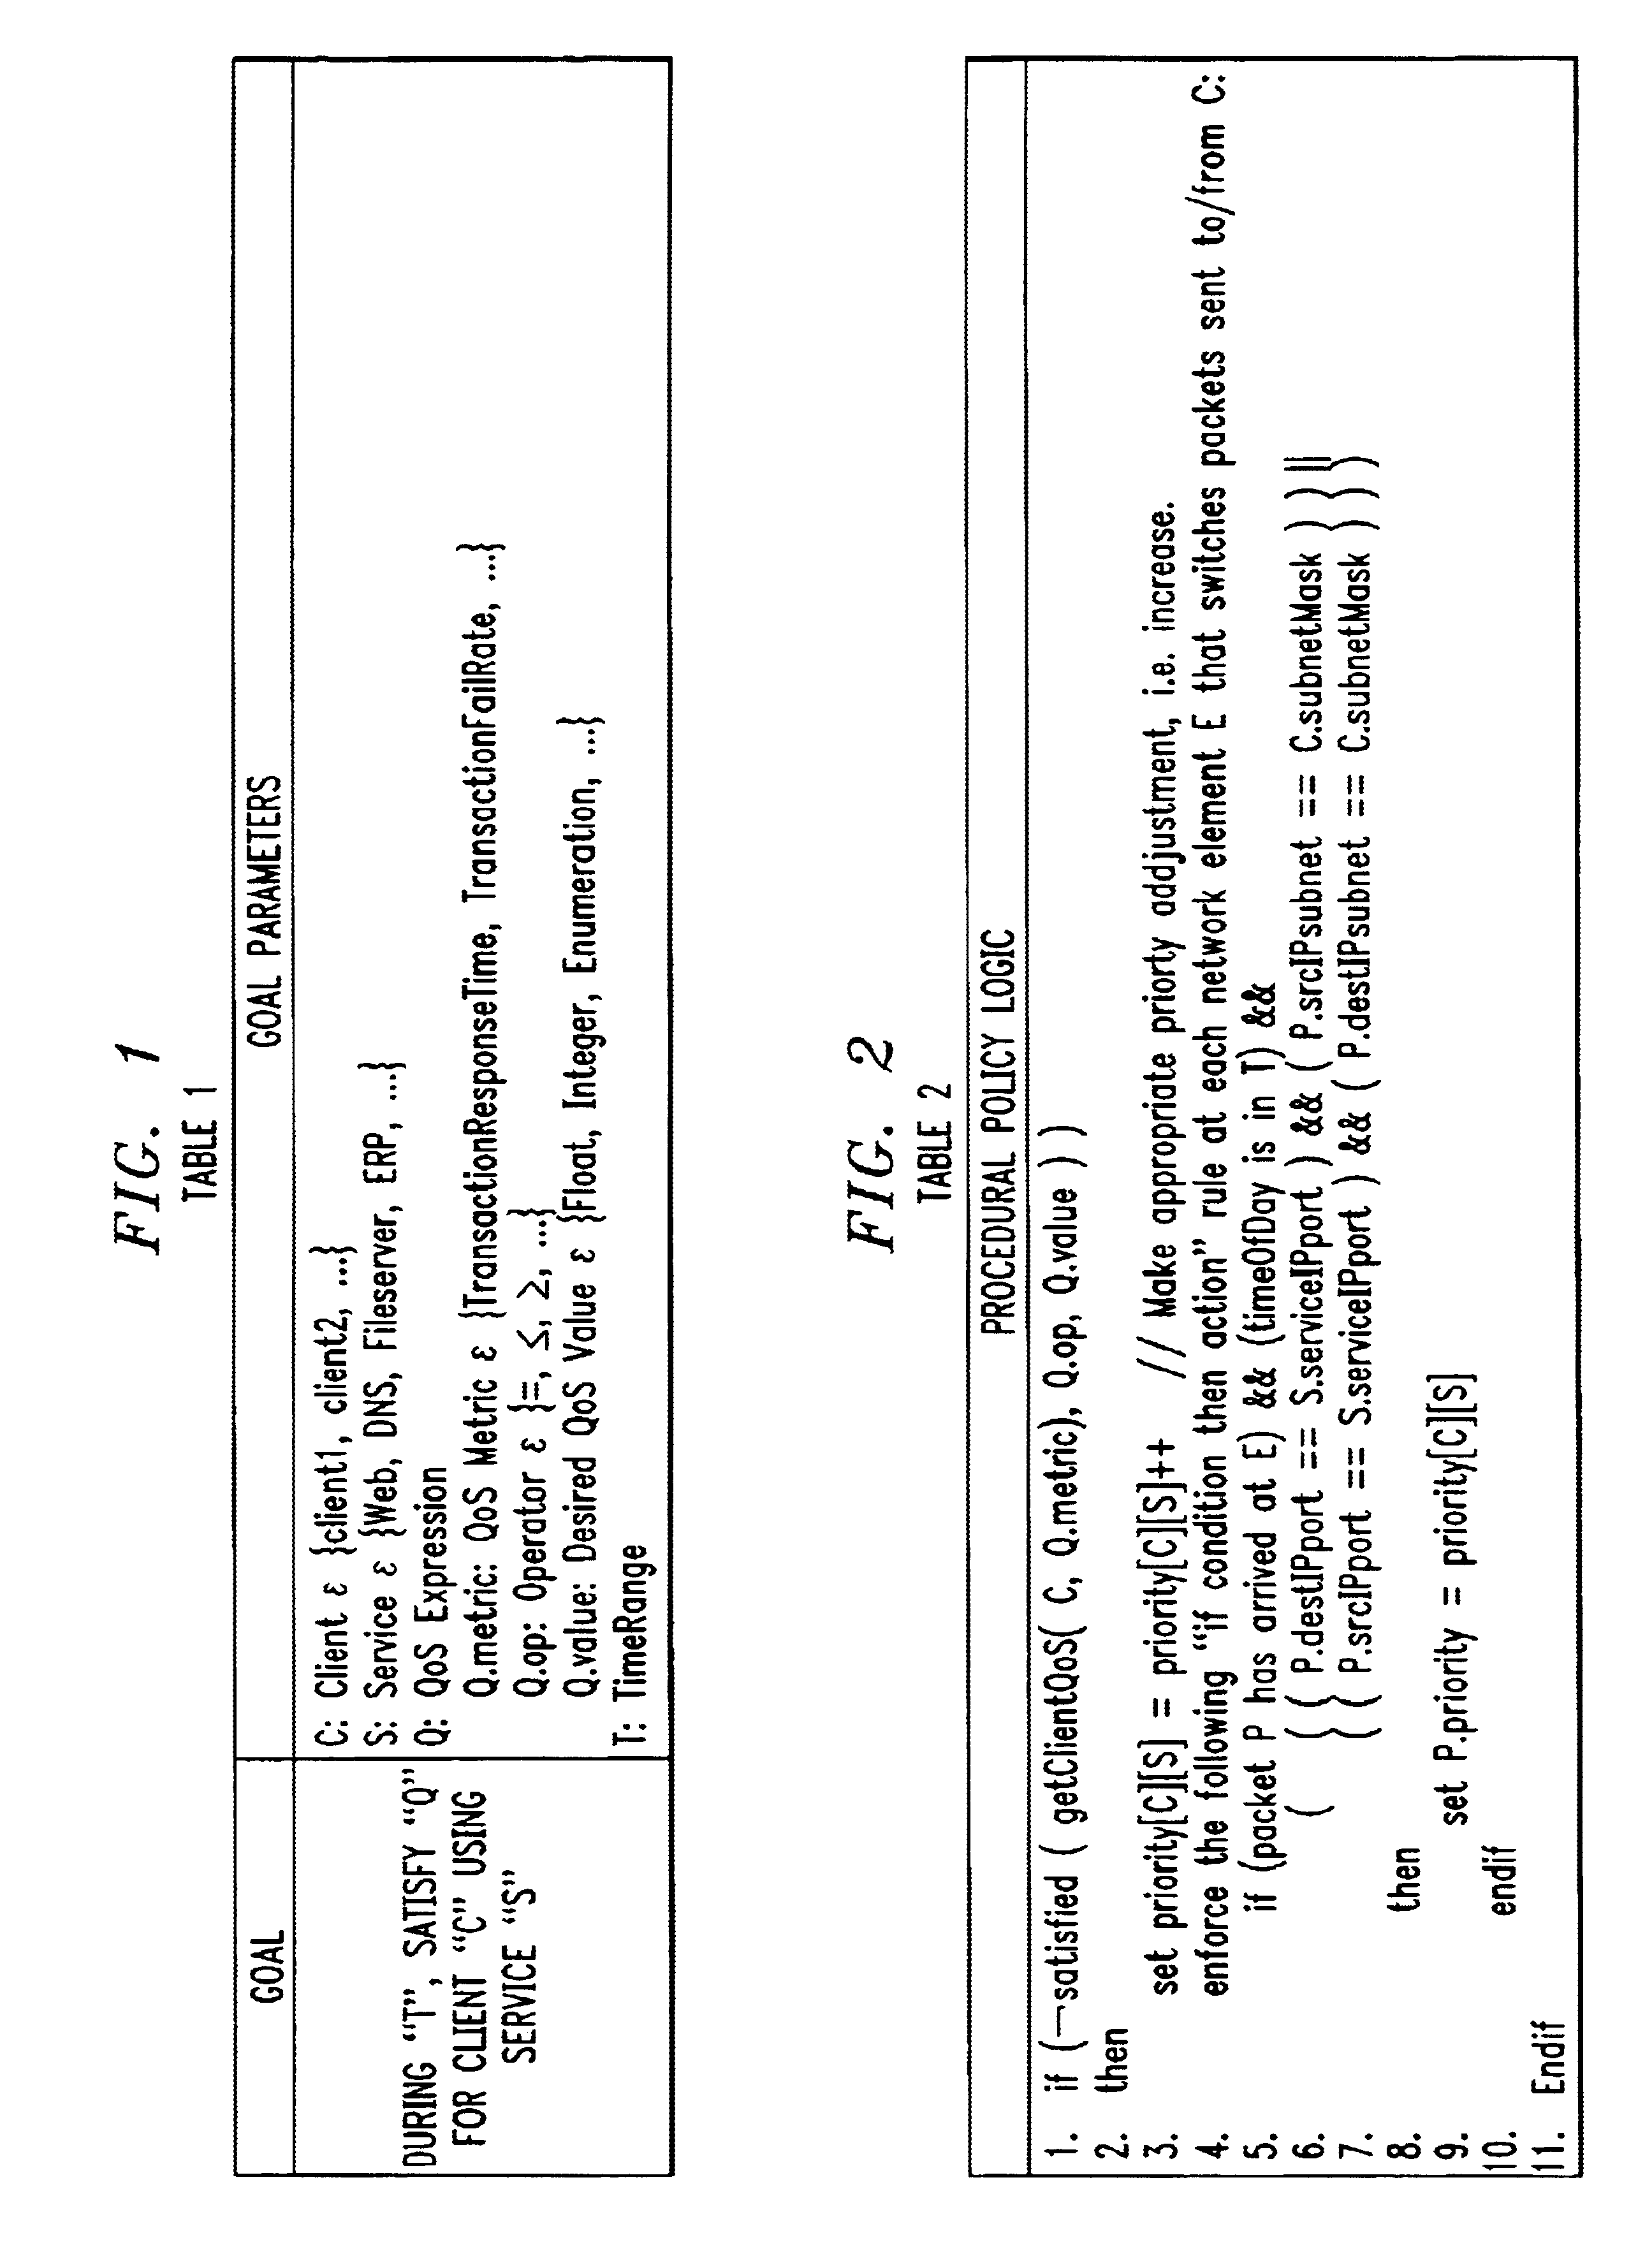 Method and apparatus for use in specifying and insuring service-level quality of service in computer networks